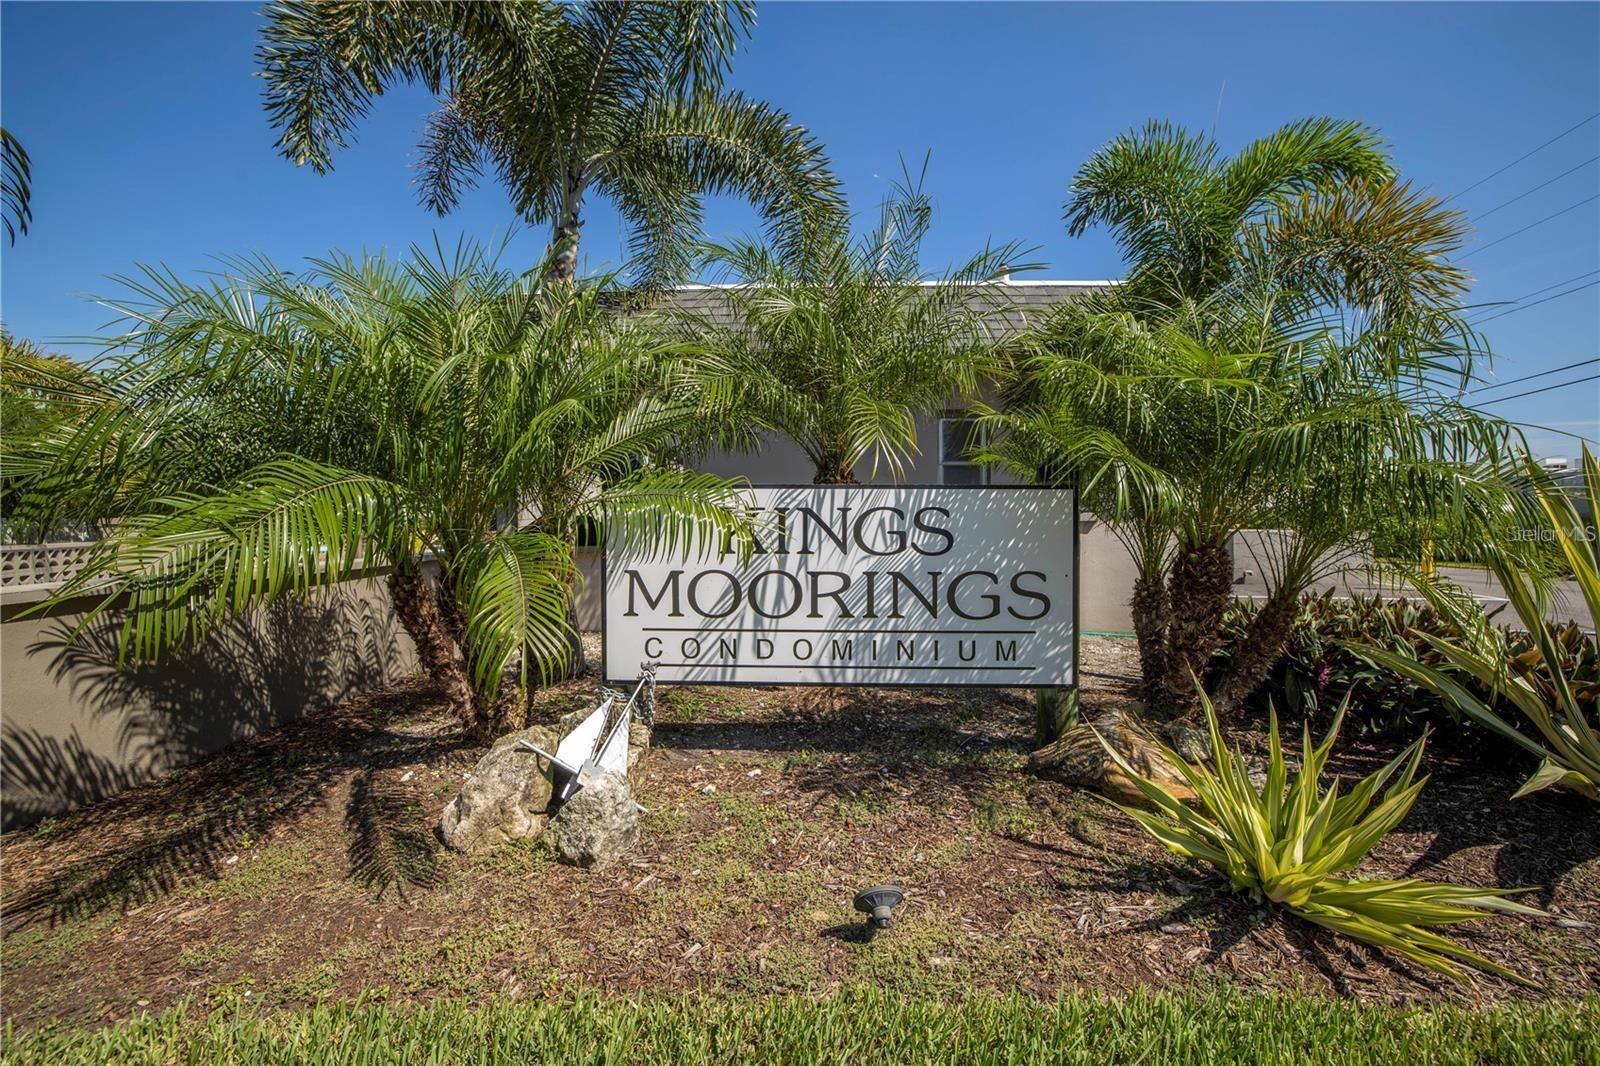 Welcome home to your Kings Moorings condo